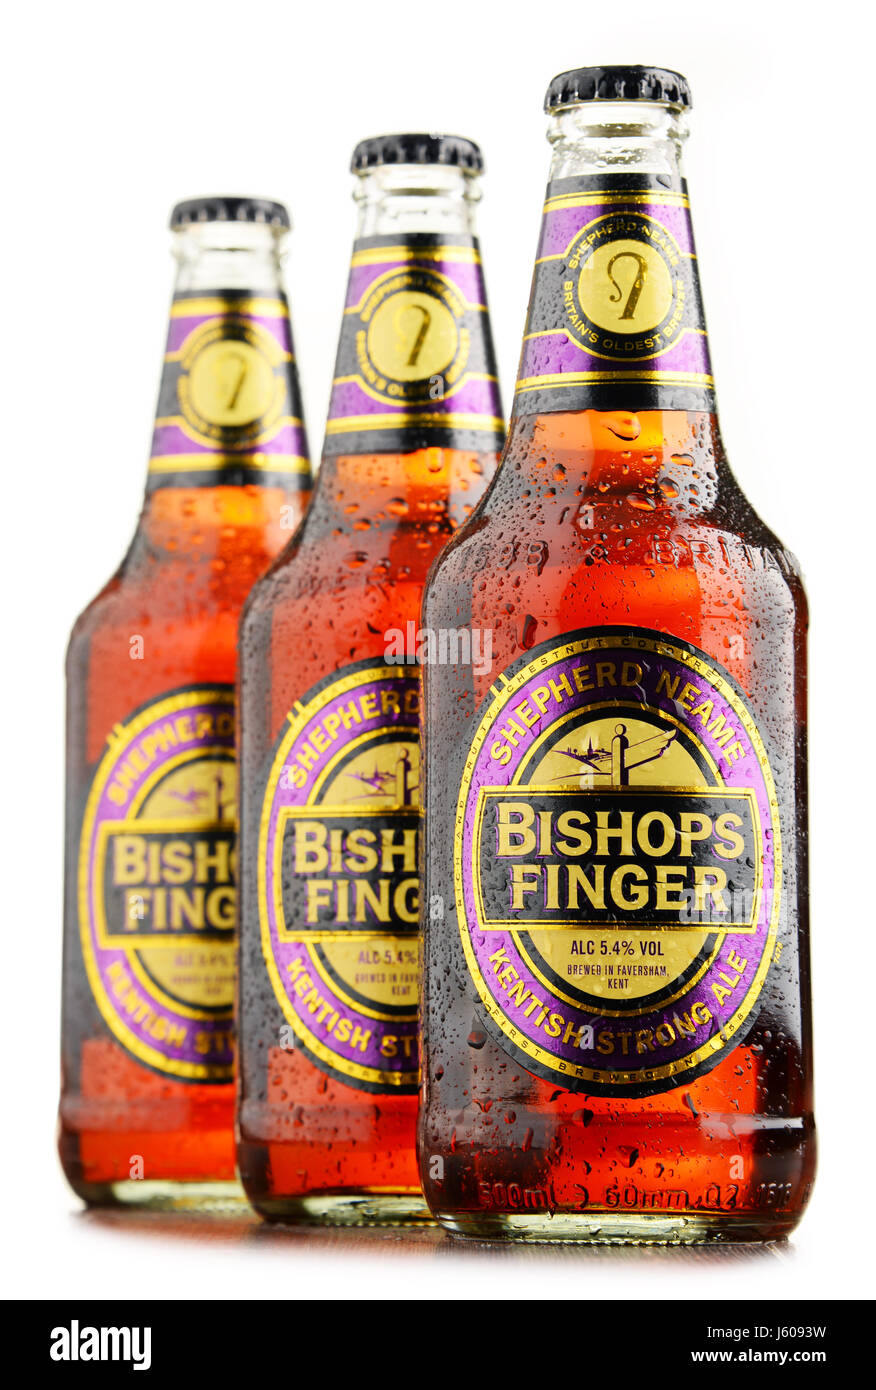 POZNAN, POLAND - AUGUST 12, 2016: Bishop's Finger  is a fine English Ale produced by Shepherd Neame, an independent regional brewery located in Favers Stock Photo